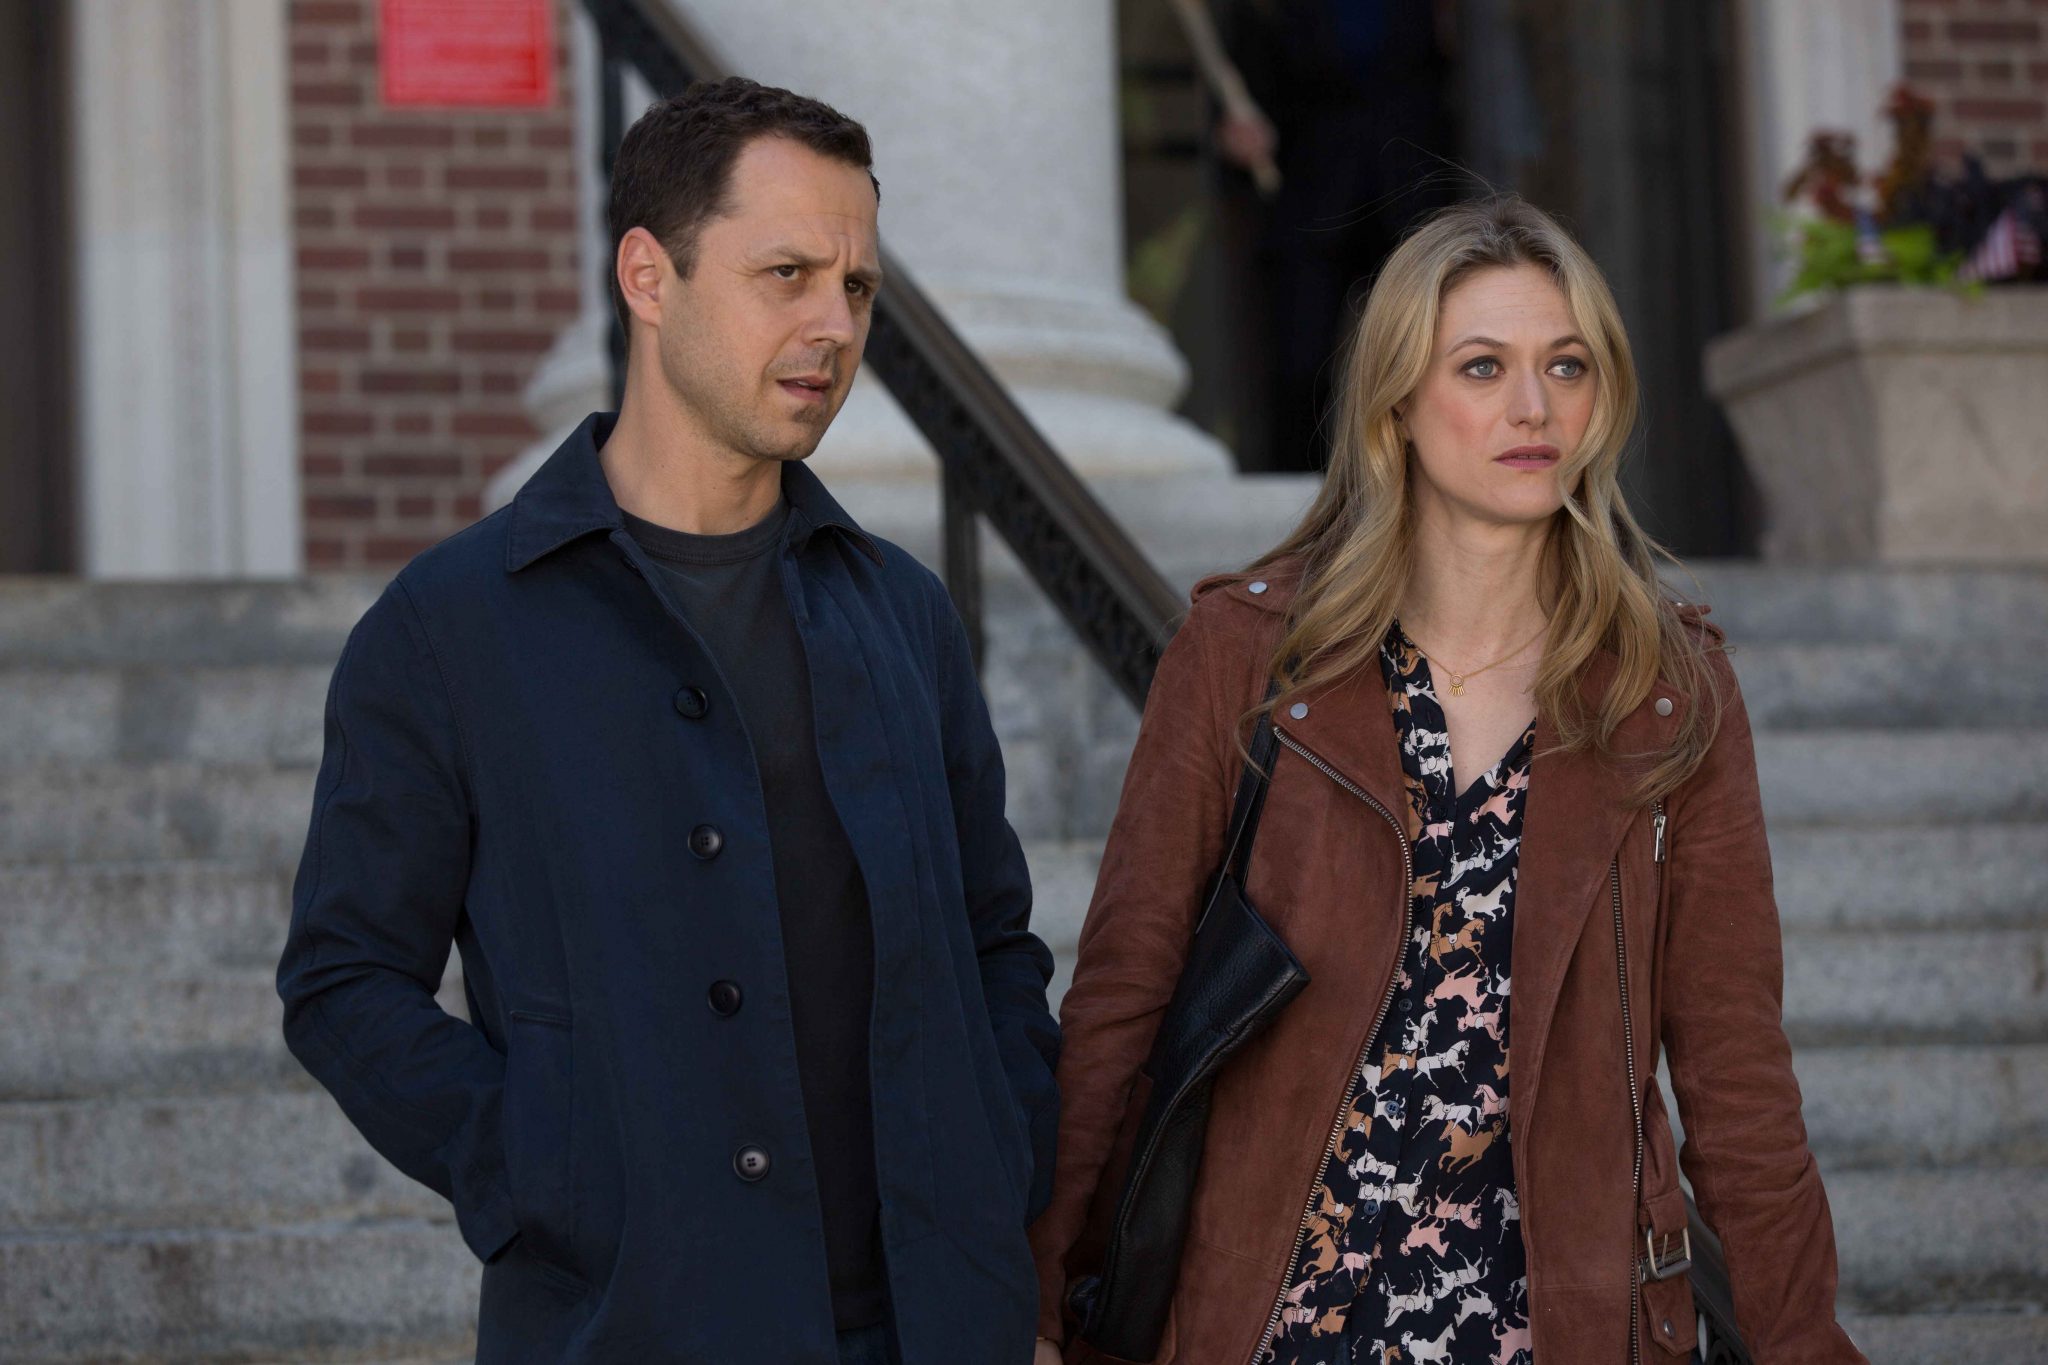 From left to right: Giovanni Ribisi as Marius/Pete and Marin Ireland as Julia Bowman. Photo Credit: Amazon Prime Video/Eric Liebowitz.